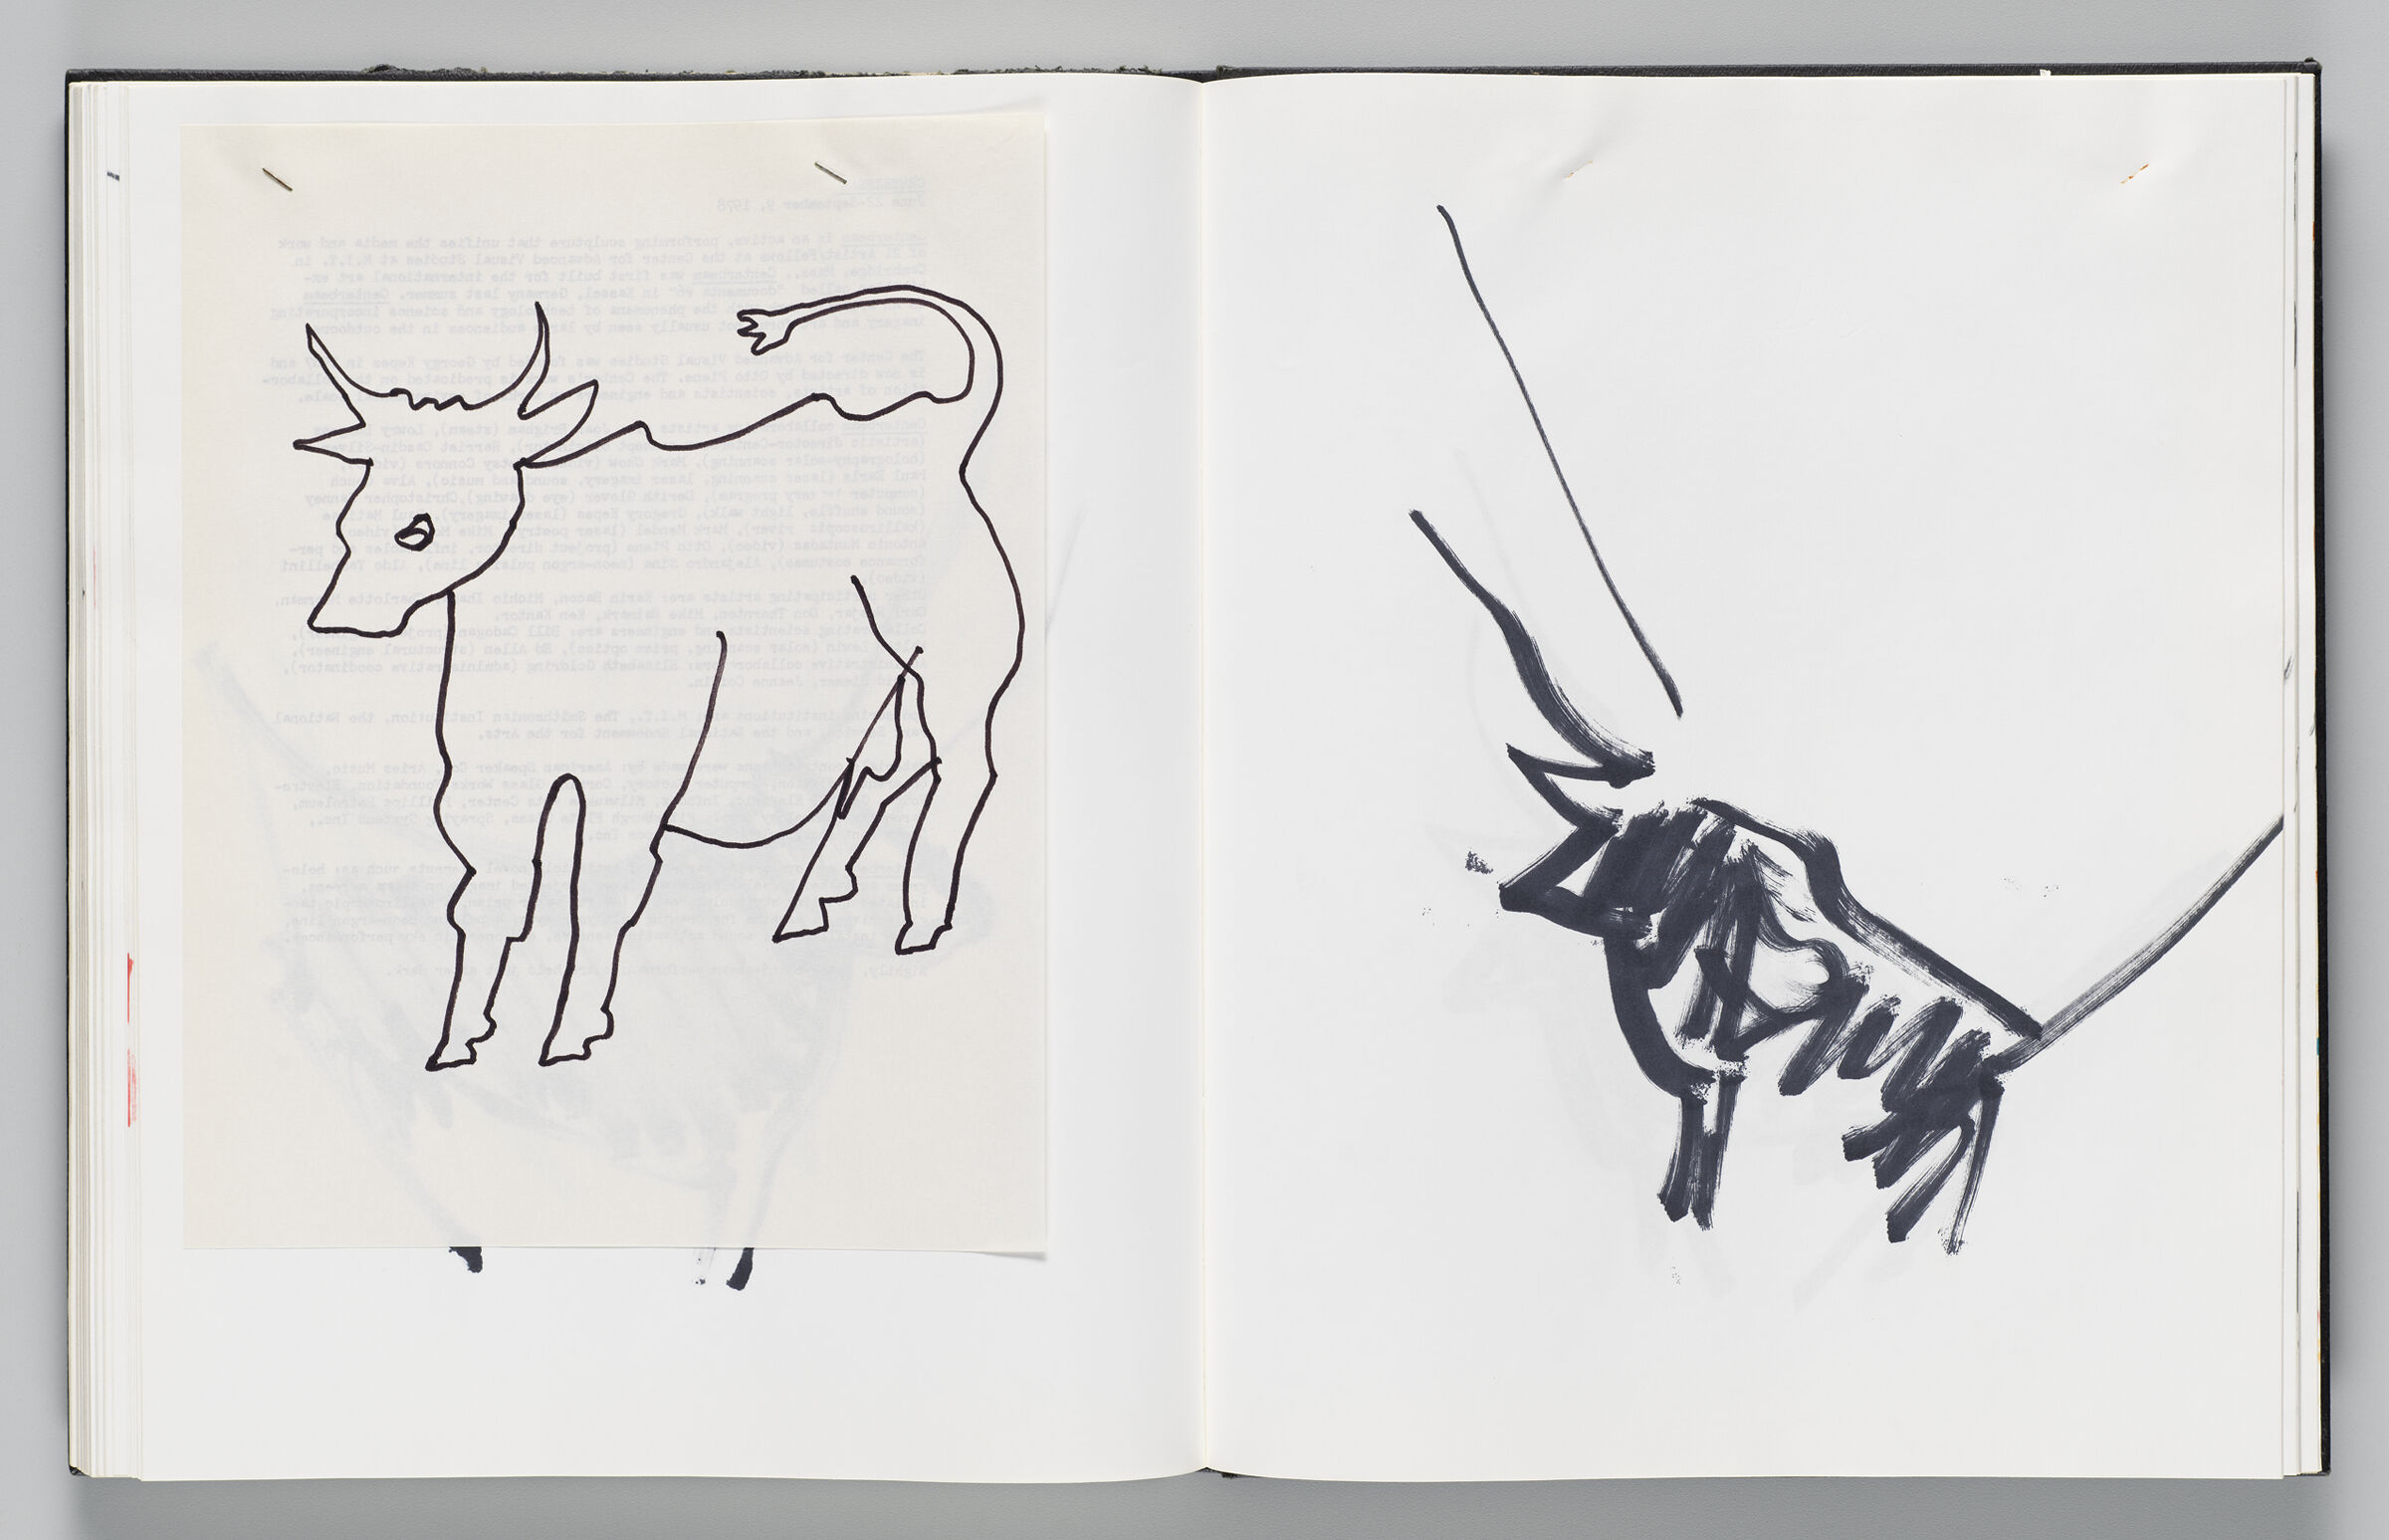 Untitled (Bleed-Through Of Previous Page With Stapled Sketch Of Minotaur, Left Page); Untitled (Minotaur In Profile, Right Page)